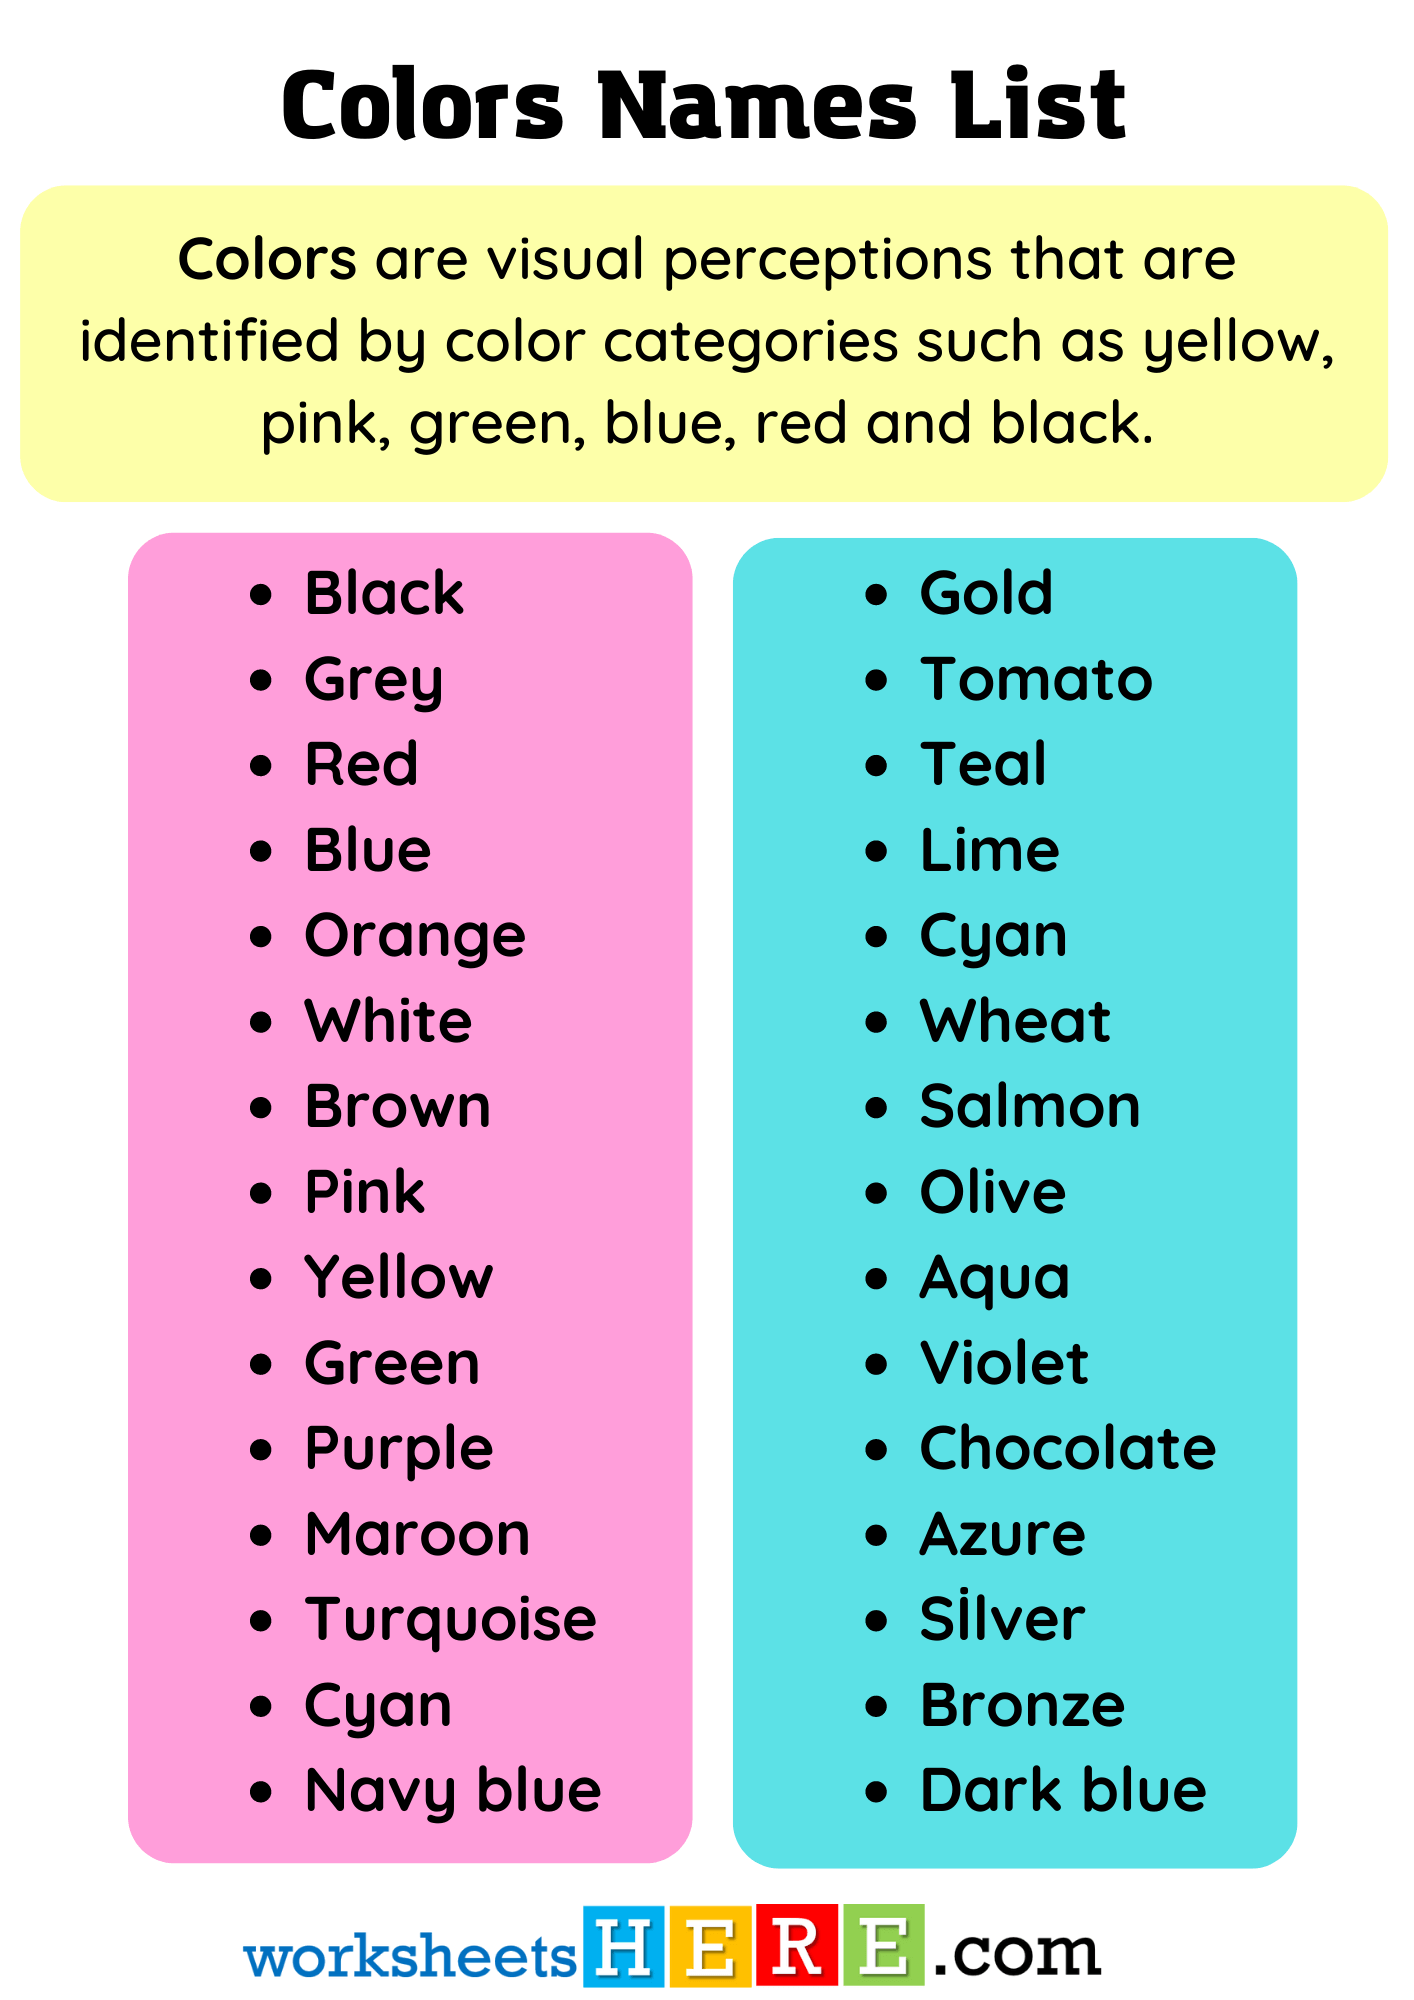 Common Colors Names List PDF Worksheet For Students and Kids